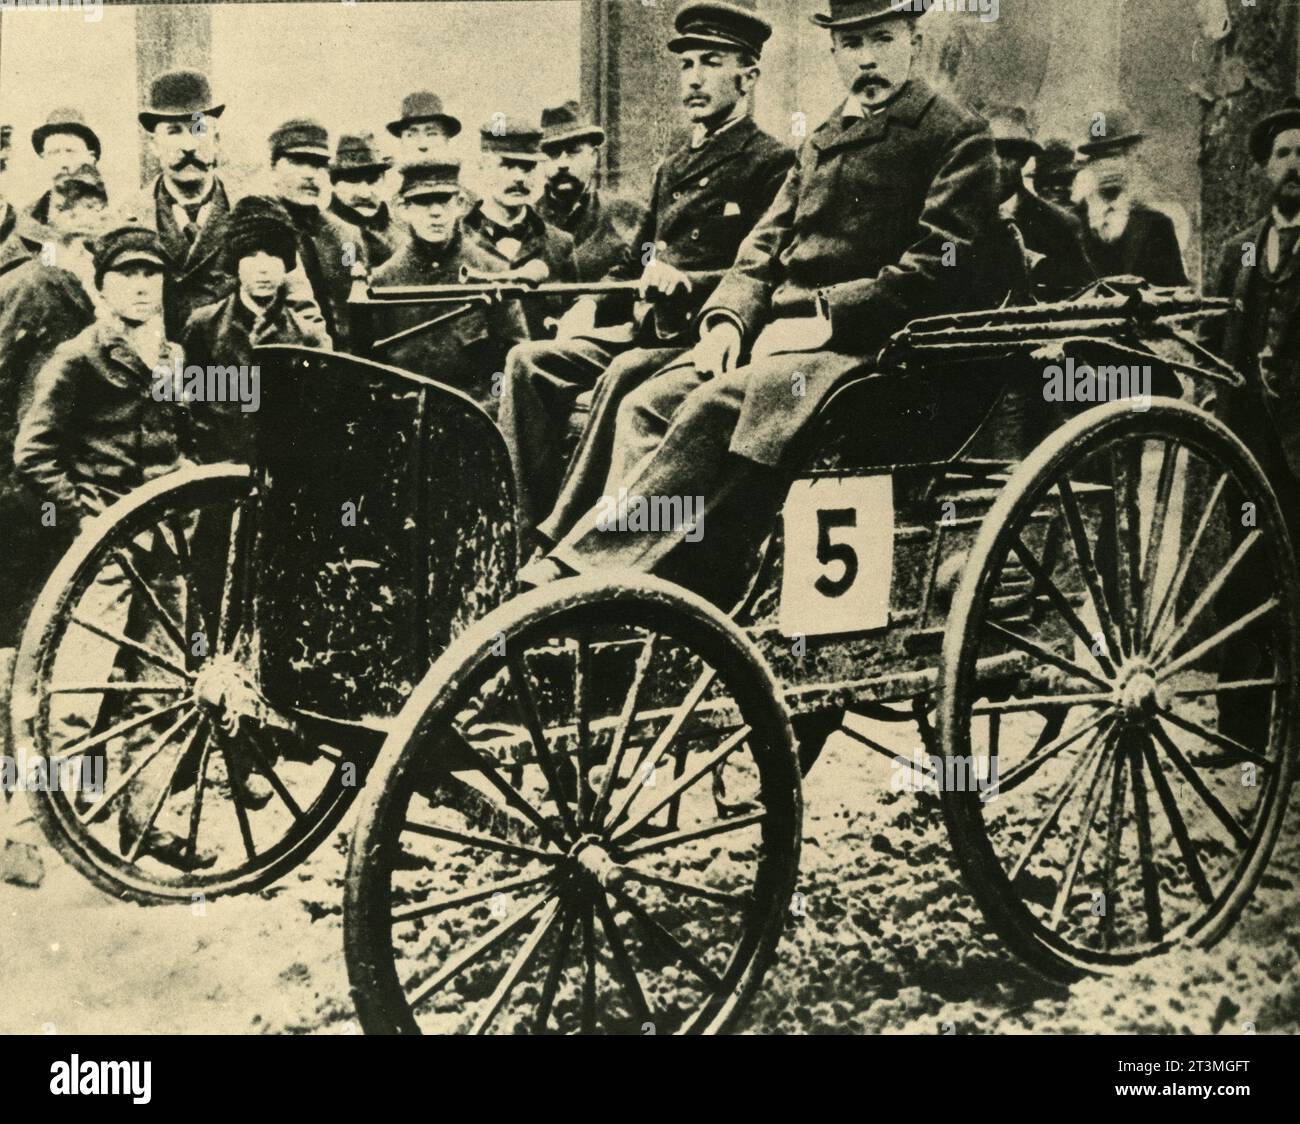 American engineers Charles and J. Frank Duryea onboard the motorized wagon winning the Chicago Times-Herald race, USA 1895 Stock Photo